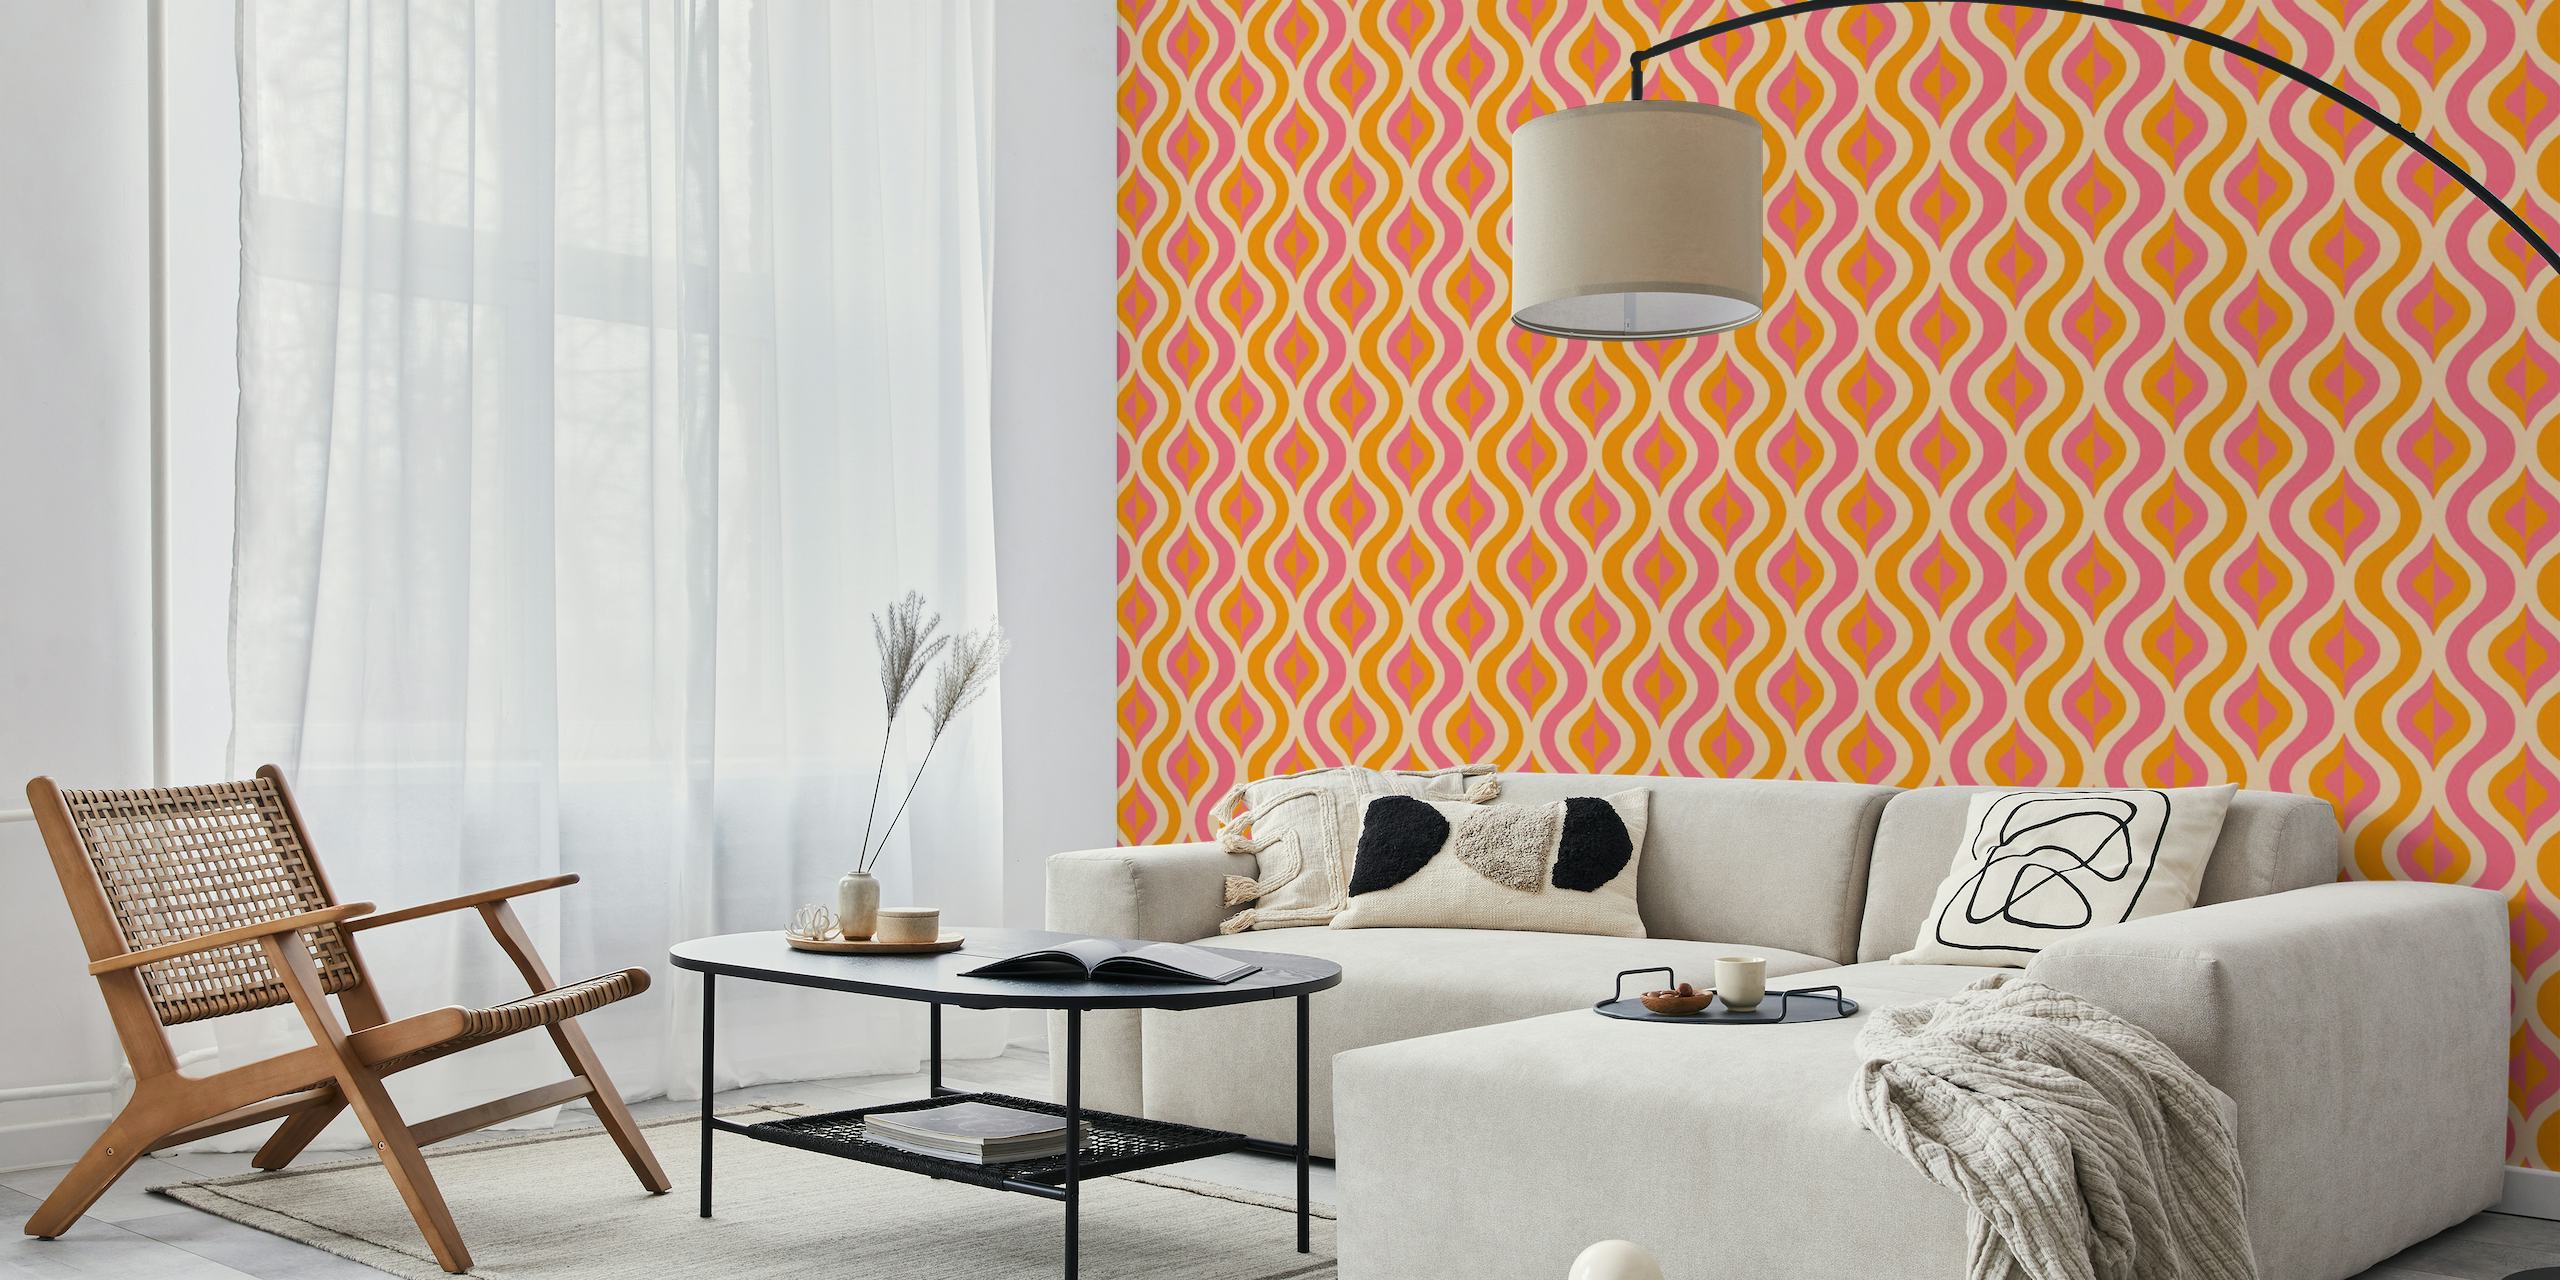 Retro Ornaments IX wall mural with a symmetrical pattern and rich peach, orange, and pink hues.